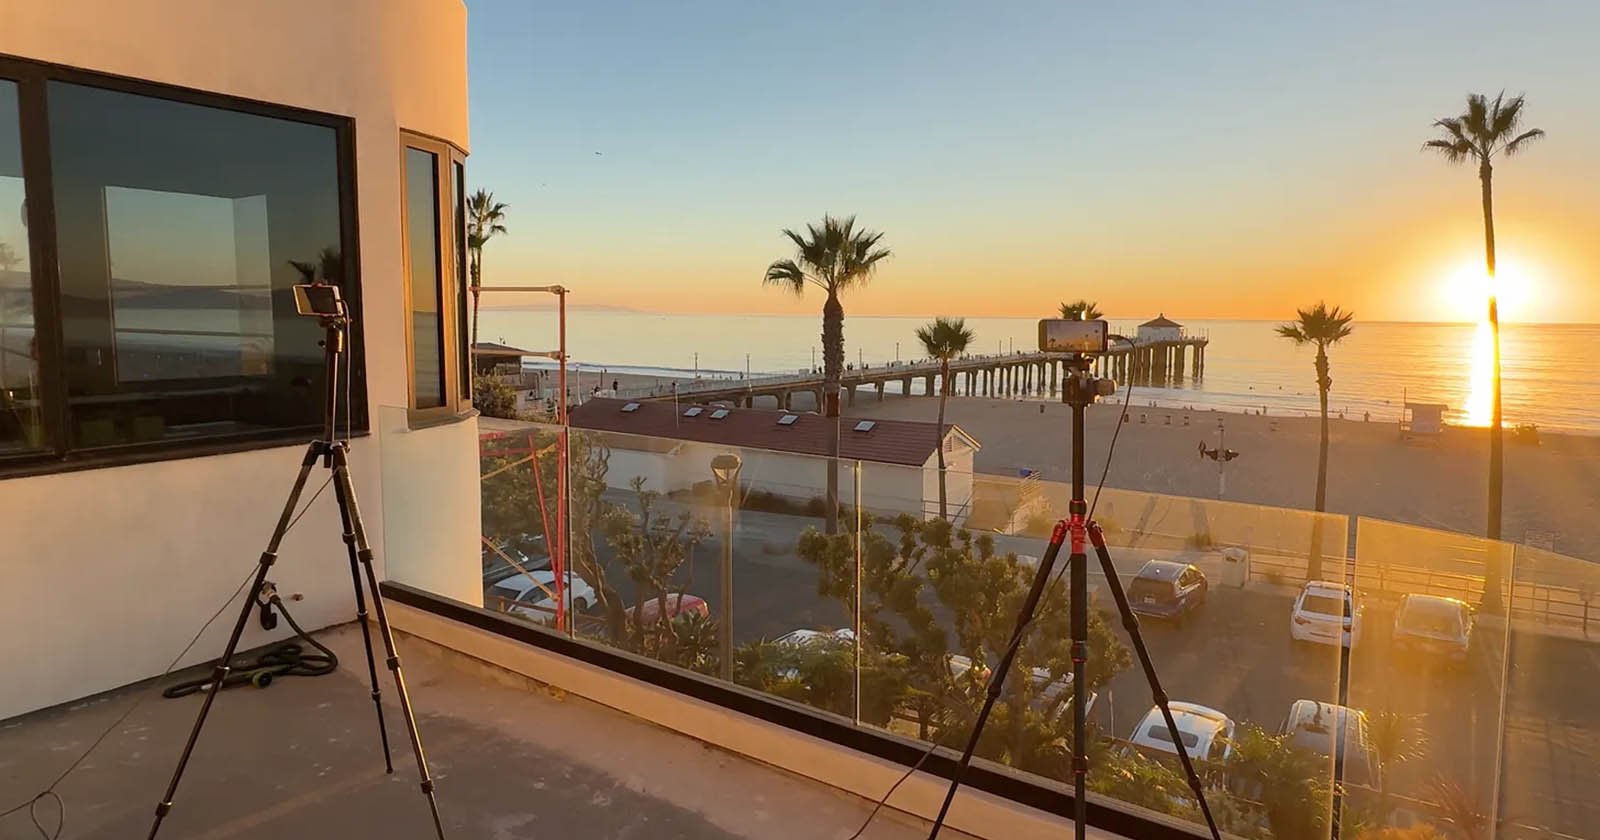 How I Made a 10-Day Timelapse Video on an iPhone and Galaxy